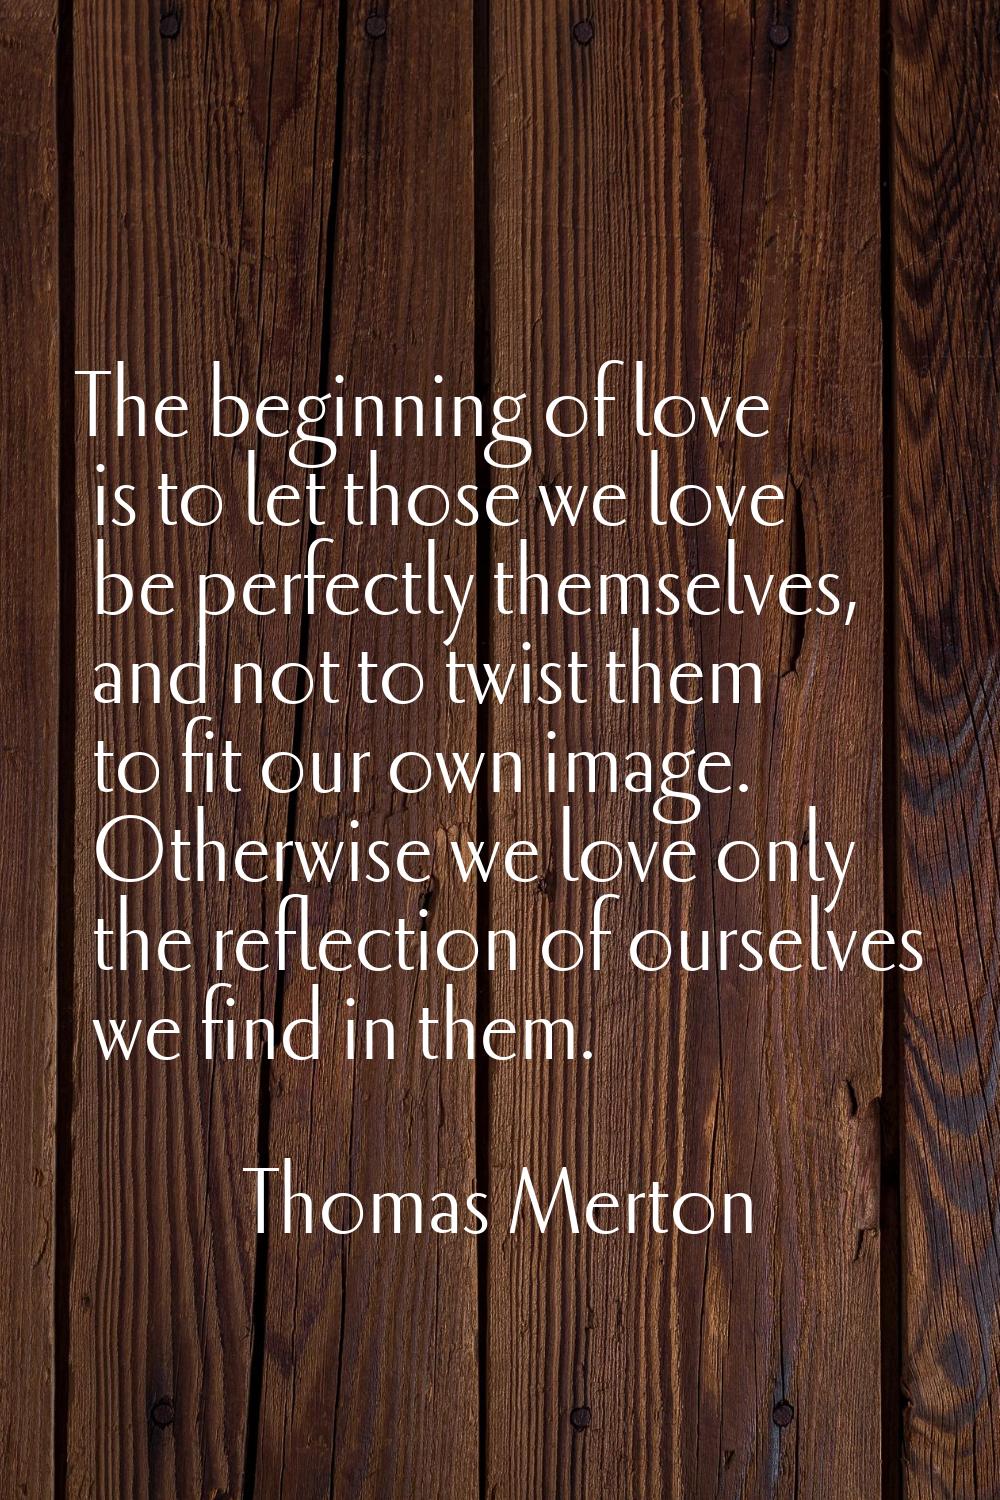 The beginning of love is to let those we love be perfectly themselves, and not to twist them to fit